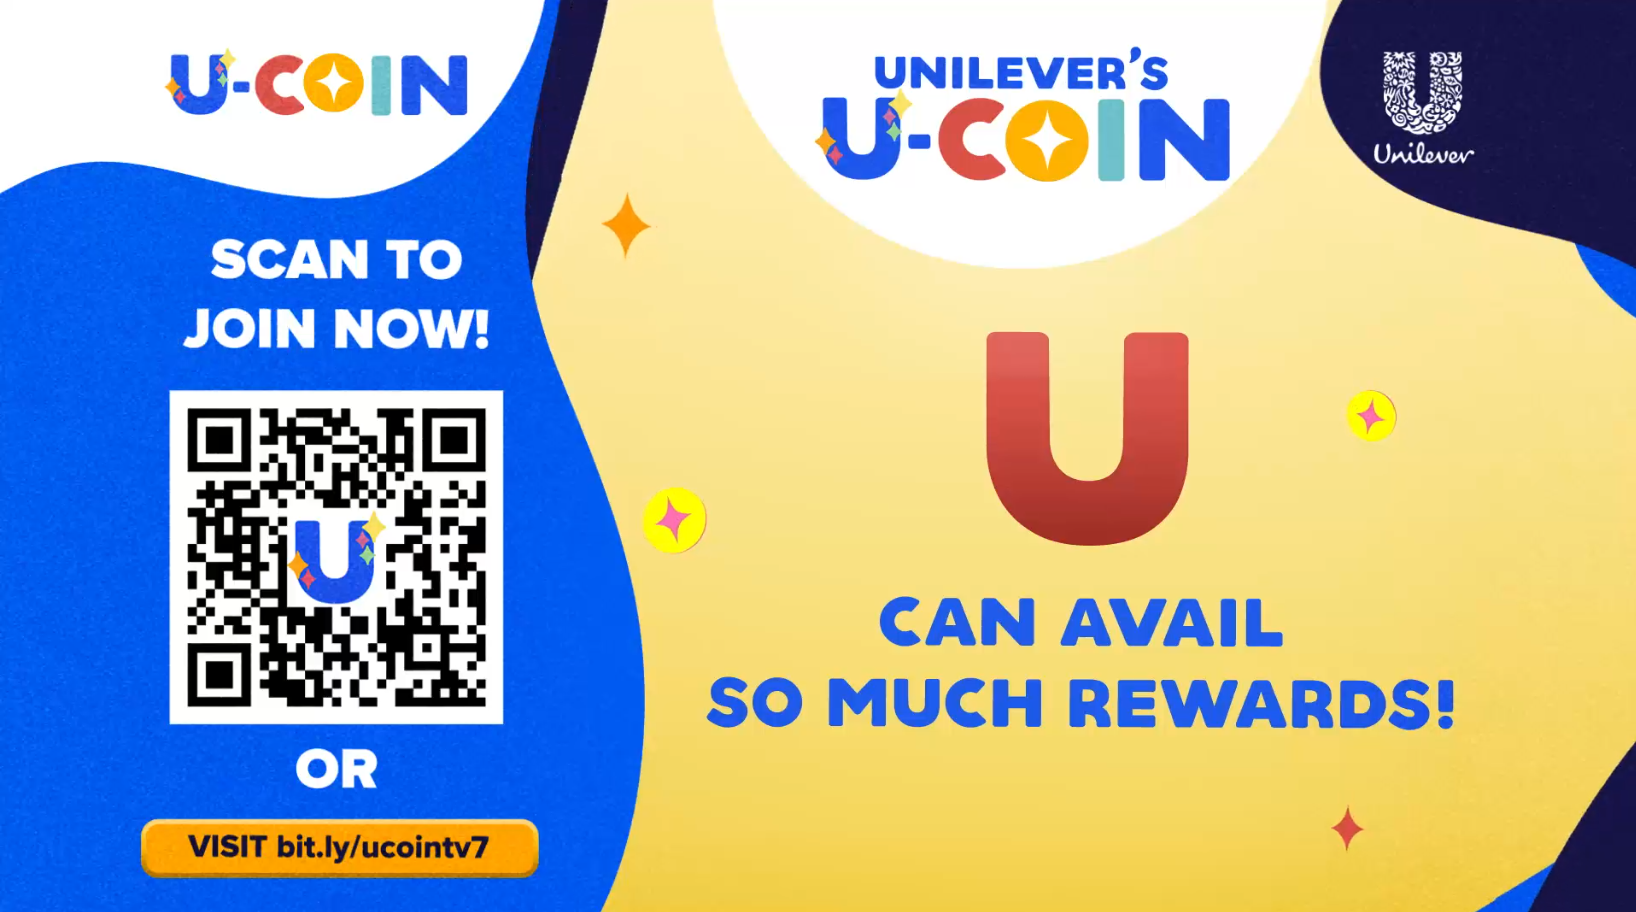 Are you enjoying the rewards of Unilever's U-Coin?